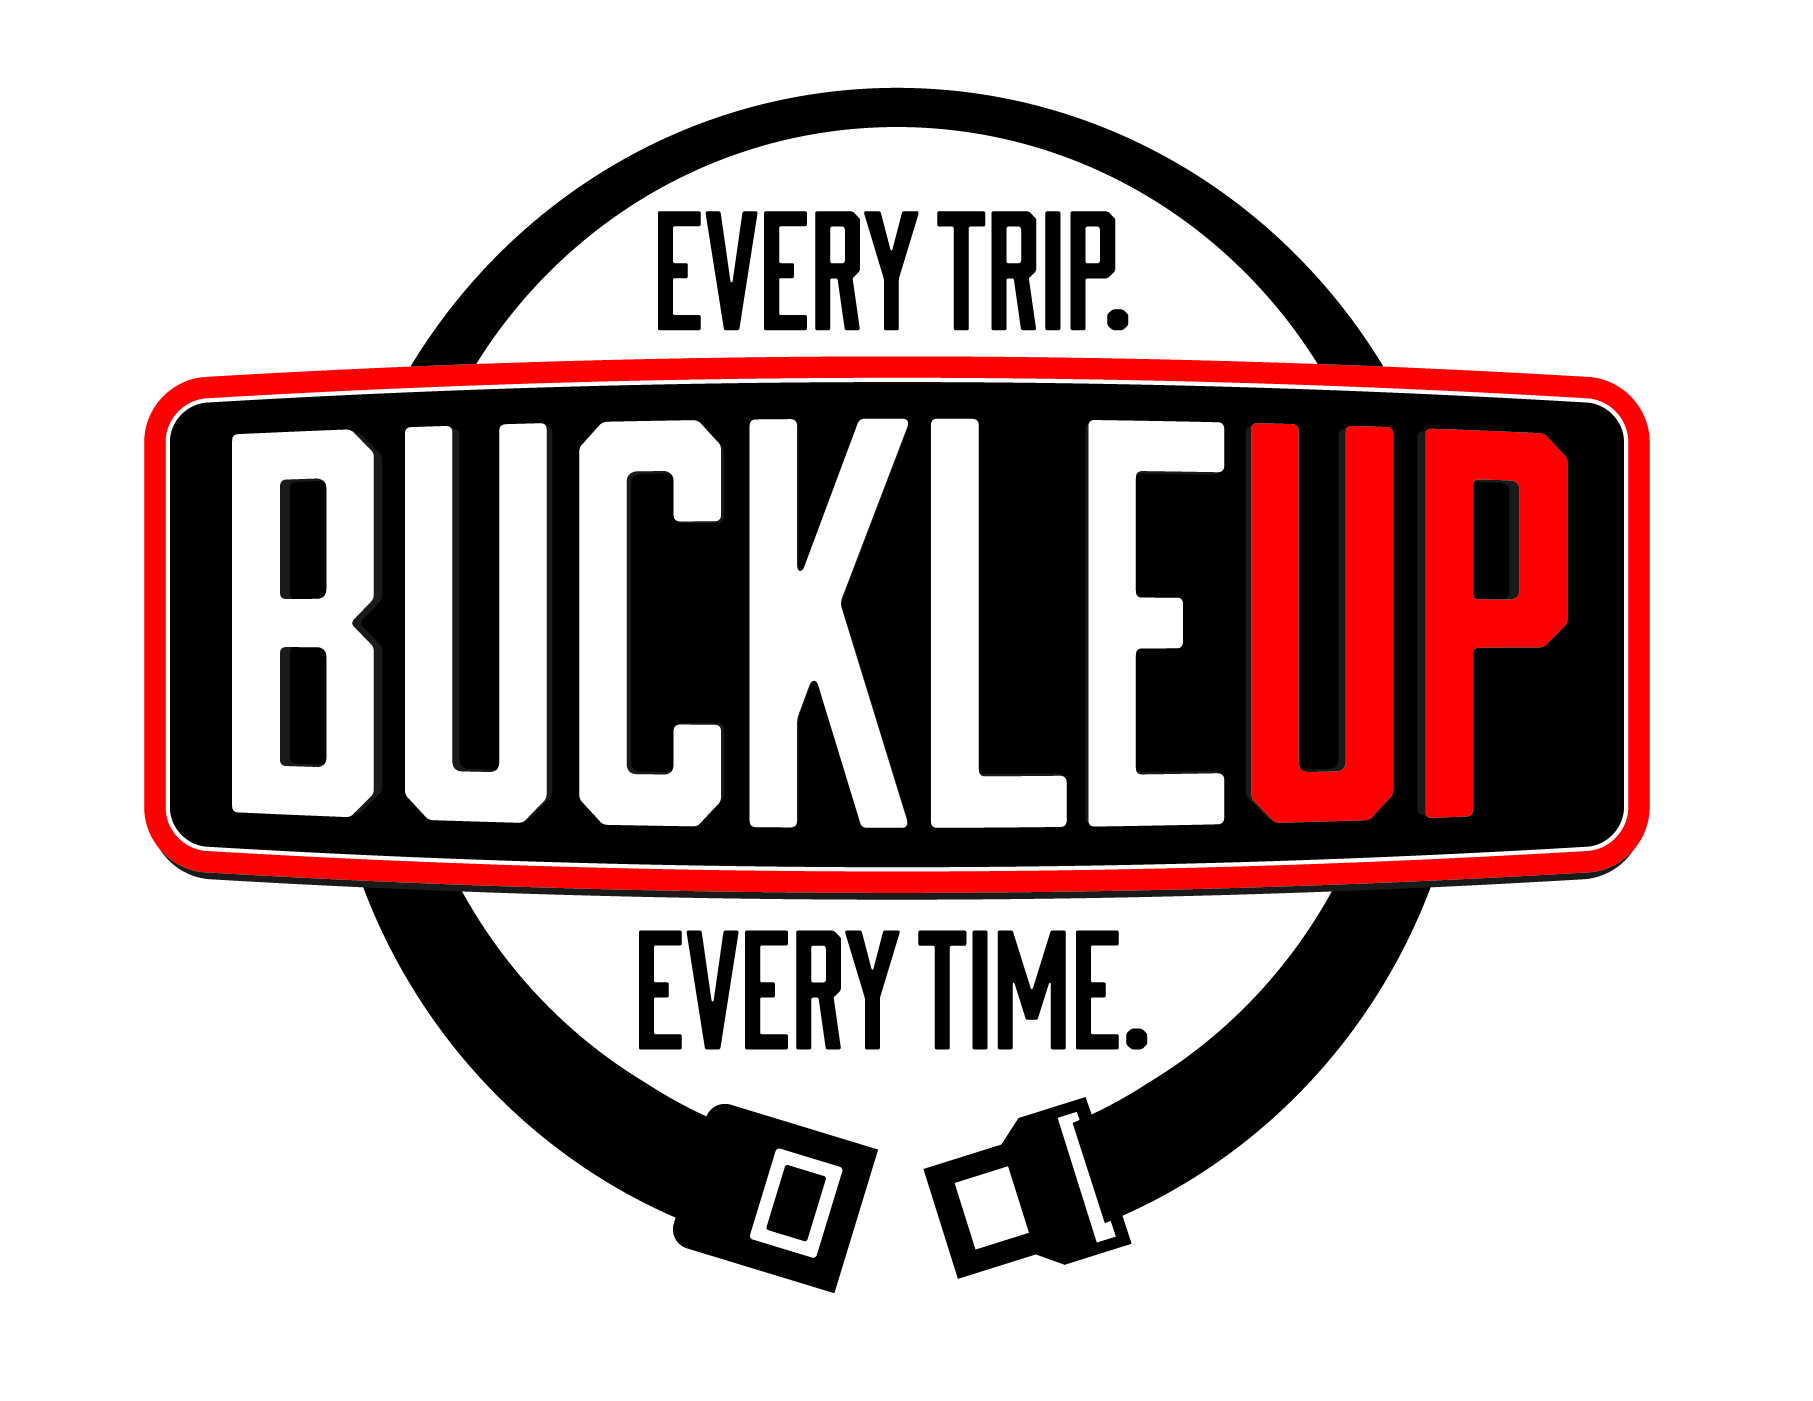 Image shows an animated seat belt wrapping around text that reads Buckle Up every trip every time.